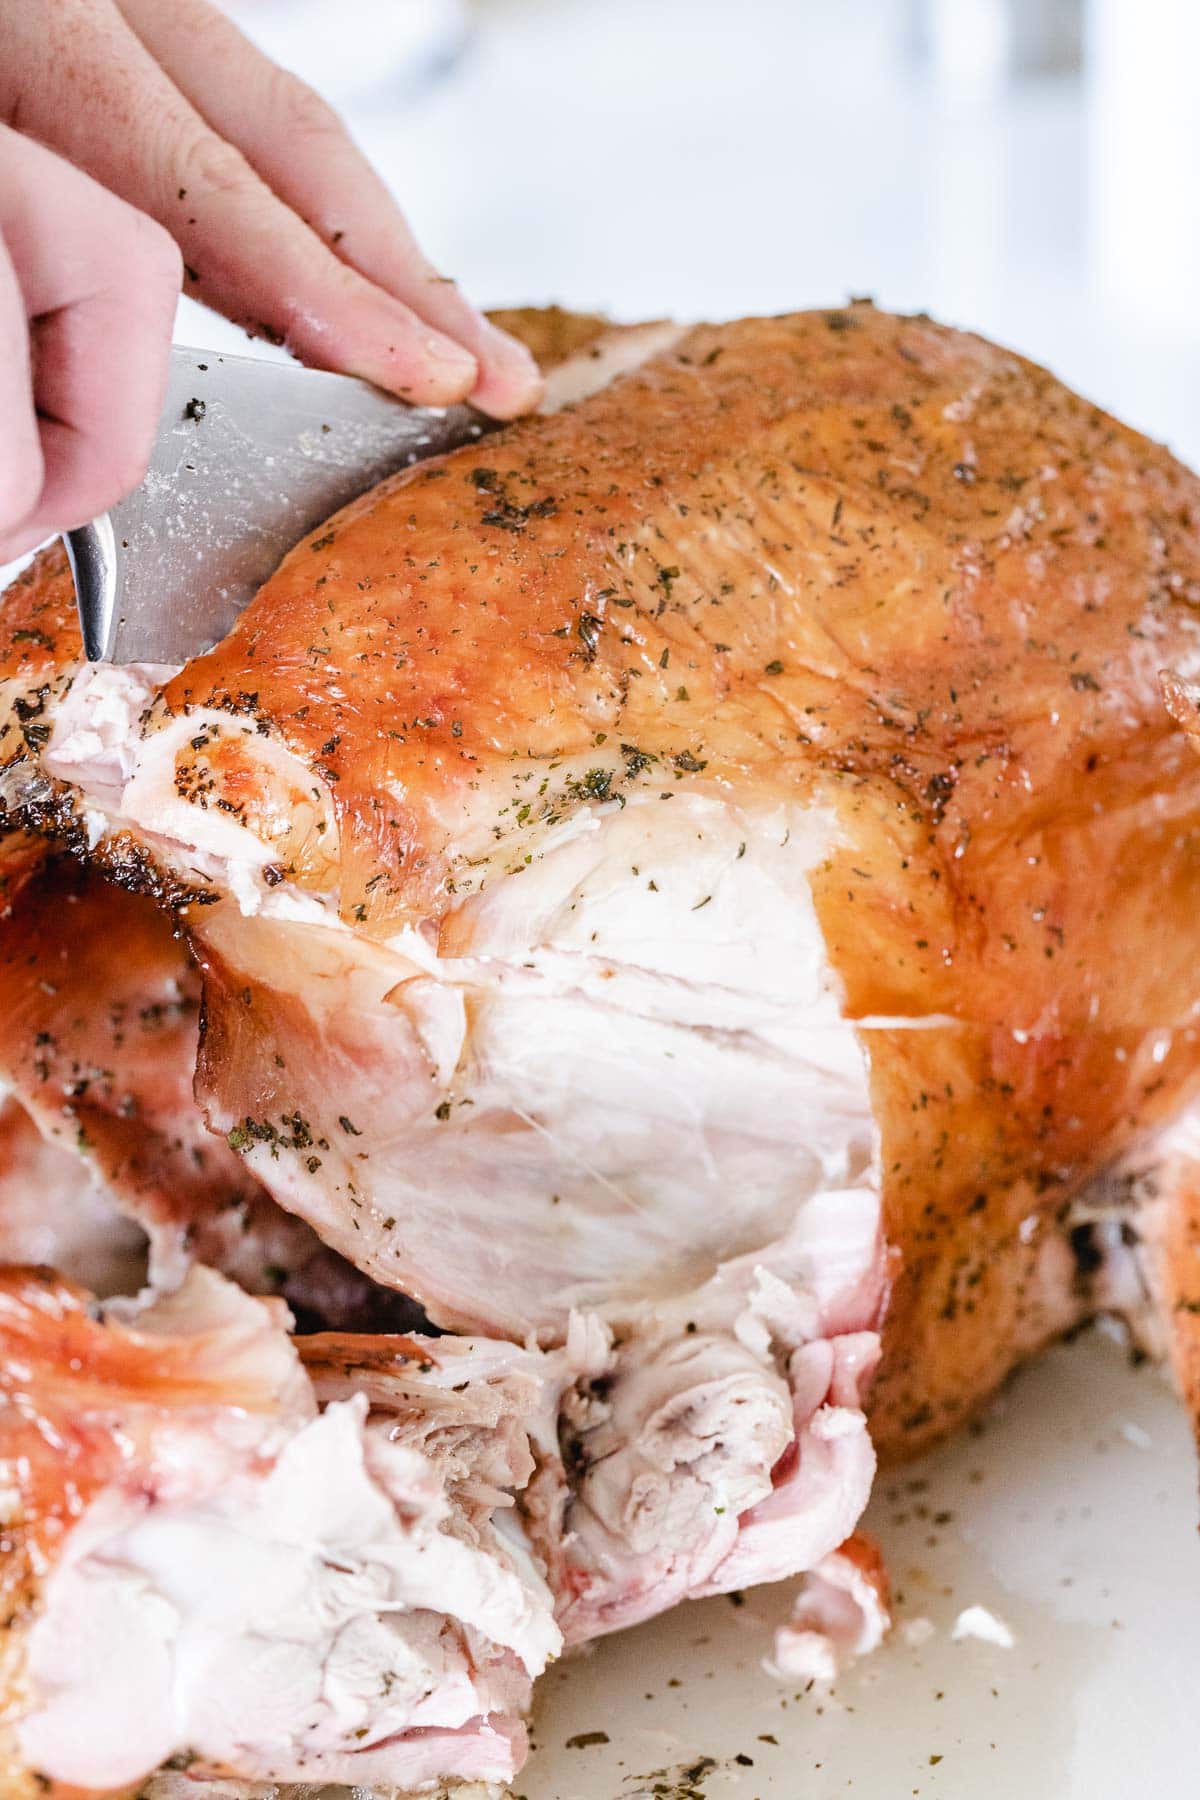 A knife slicing into a cooked turkey that already has the legs removed.